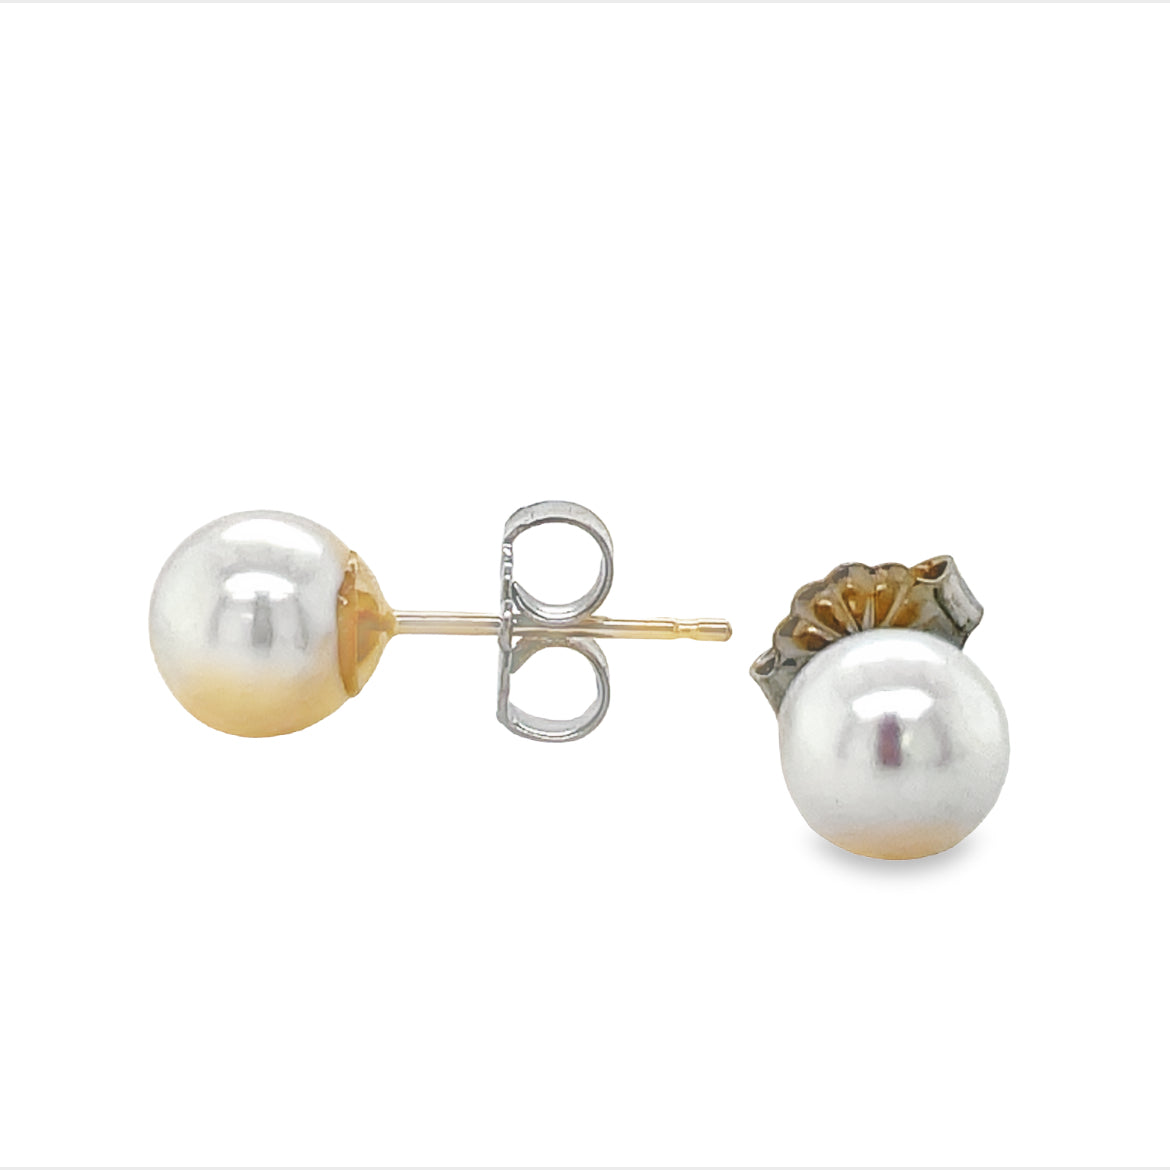 These elegant studs feature 6.00 mm Akoya Cultured Pearls with a high-luster finish and 14k Yellow Gold settings, complemented by secure friction backs for peace of mind. Perfect for any occasion. 